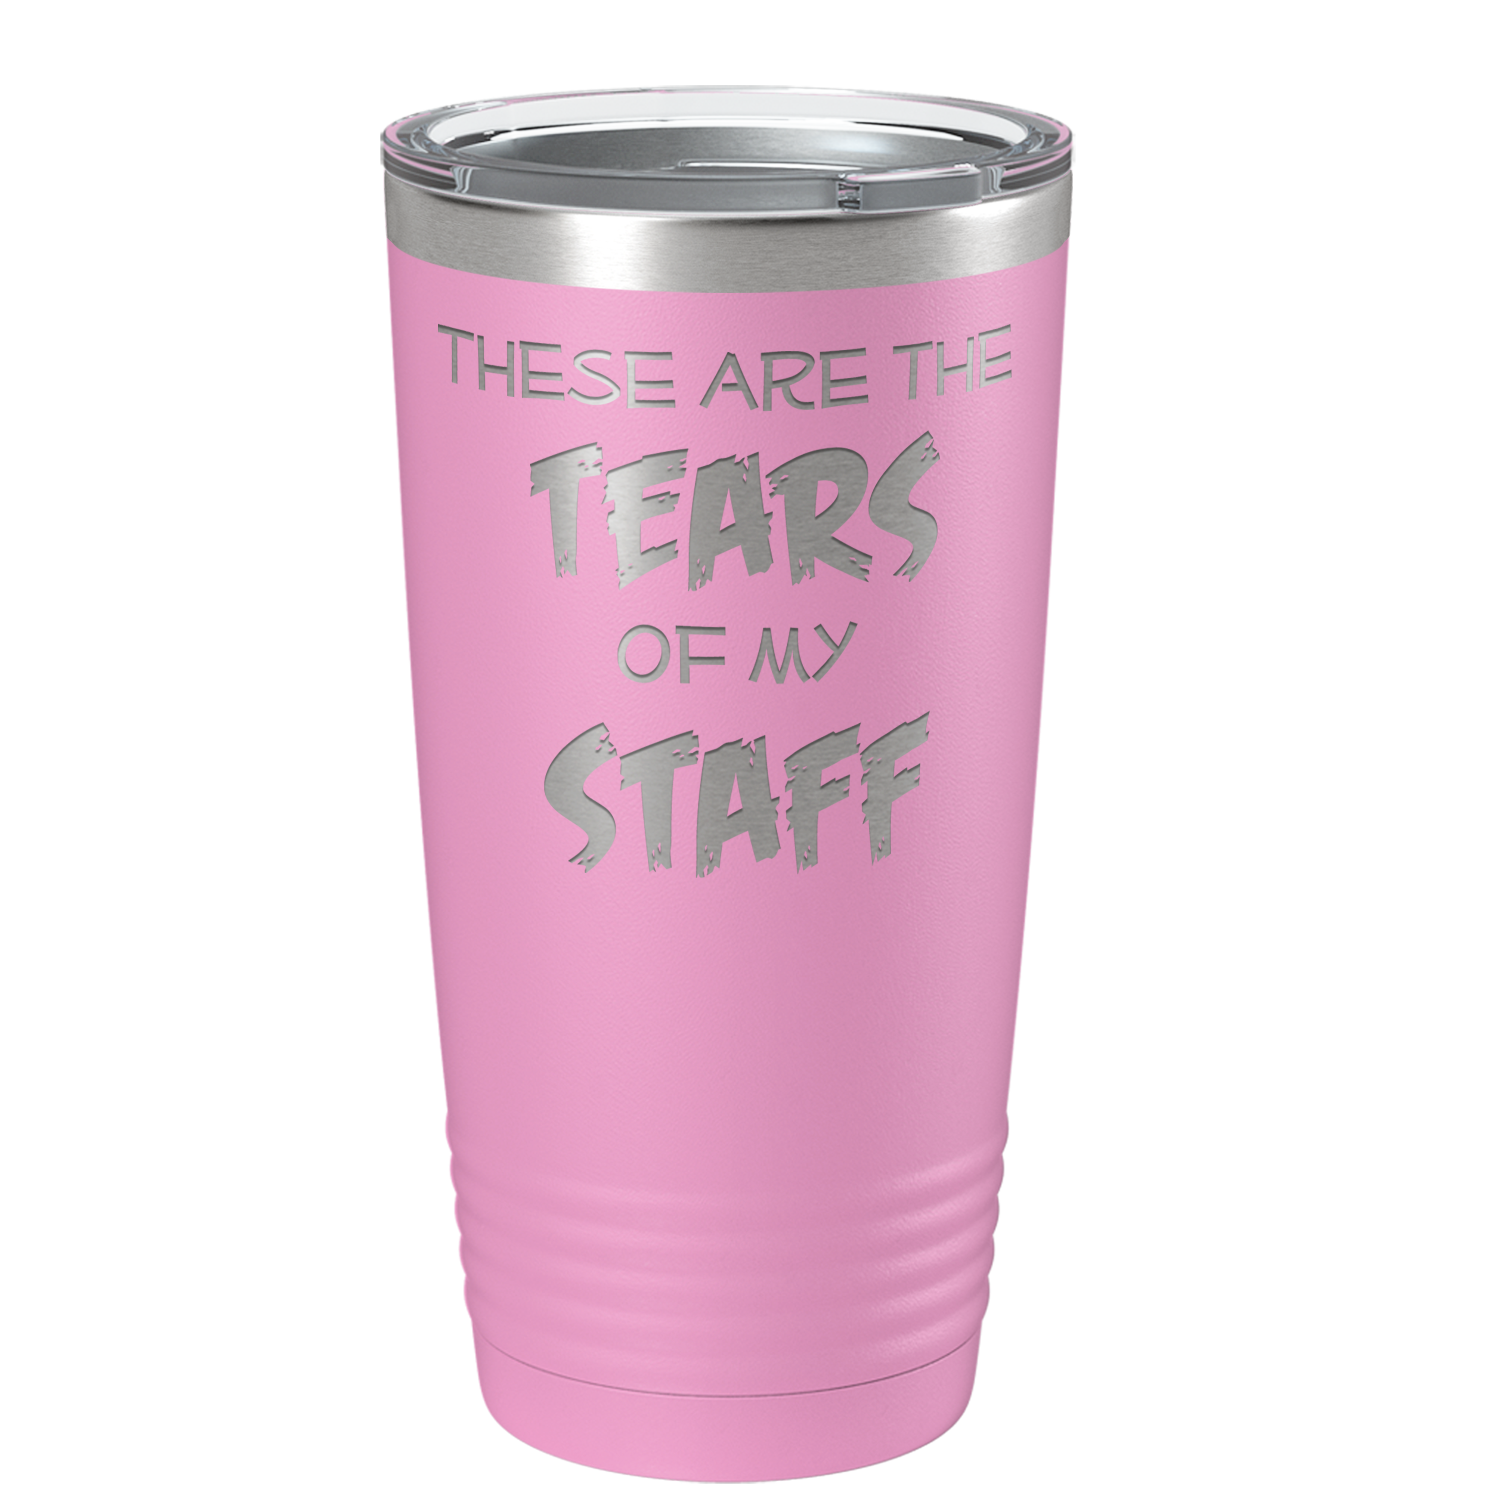 These are Tears of my Staff on Blush 20 oz Stainless Steel Ringneck Tumbler